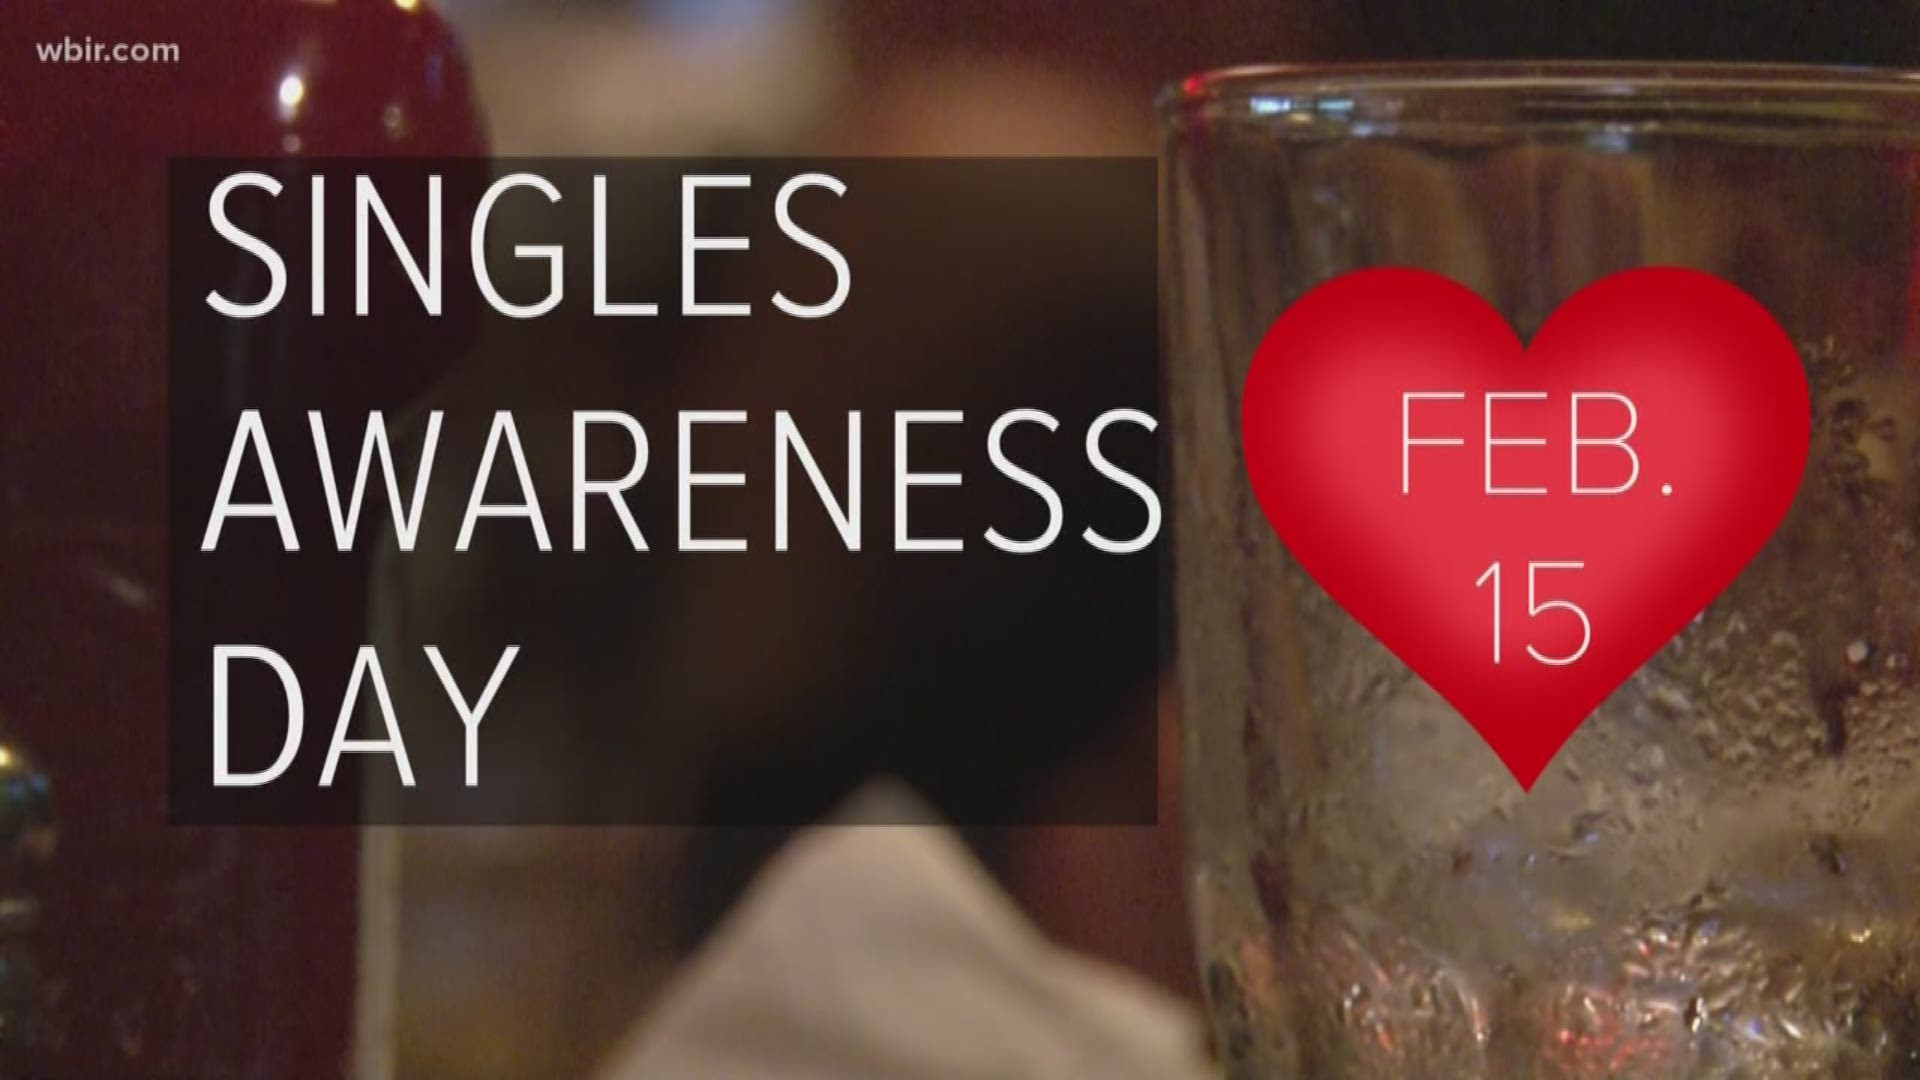 10News Reporter Katie Inman dives into what Singles Awareness Day is and how some Knoxville Singles are celebrating.